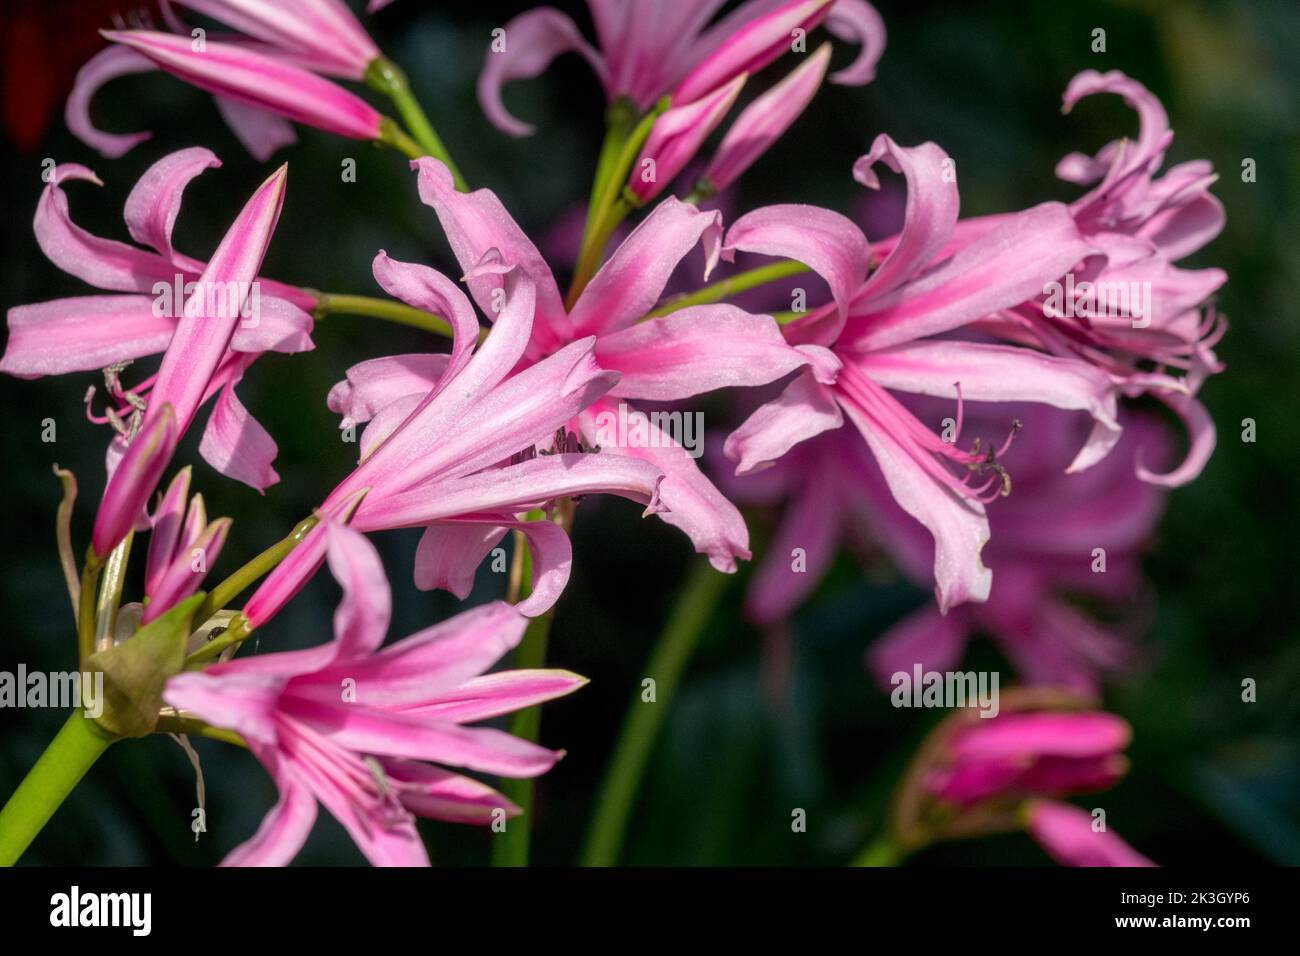 Nerine bowdenii Flor, Guernsey Lily, Rosa Nerine Blooming, Jersey Lily, Cape Flower hermosas flores Foto de stock